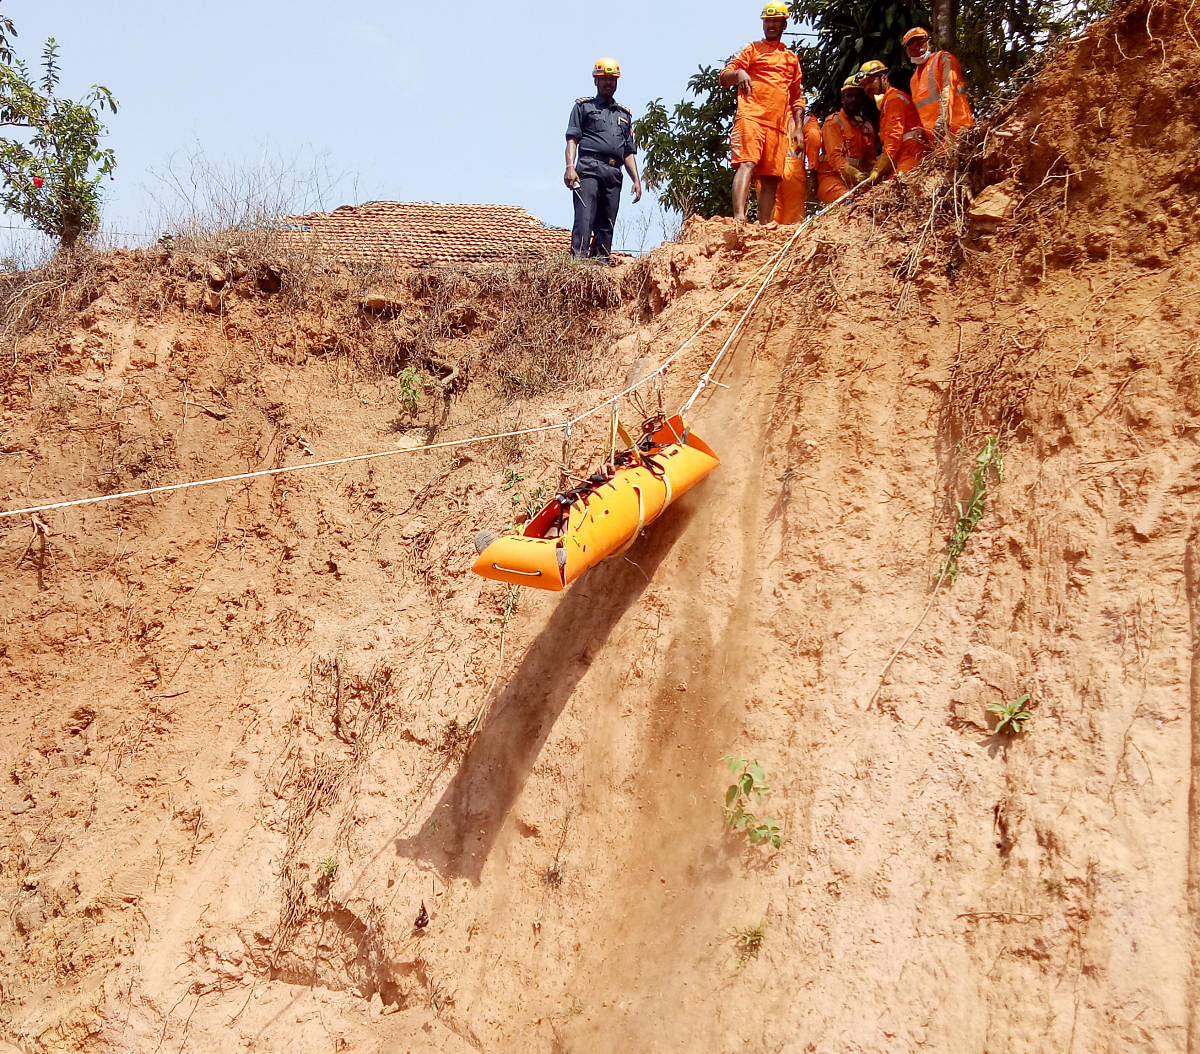 A lifting bag to rescue people used at Hebbattageri during mock exercises carried out by the district administration in Kodagu on Wednesday.